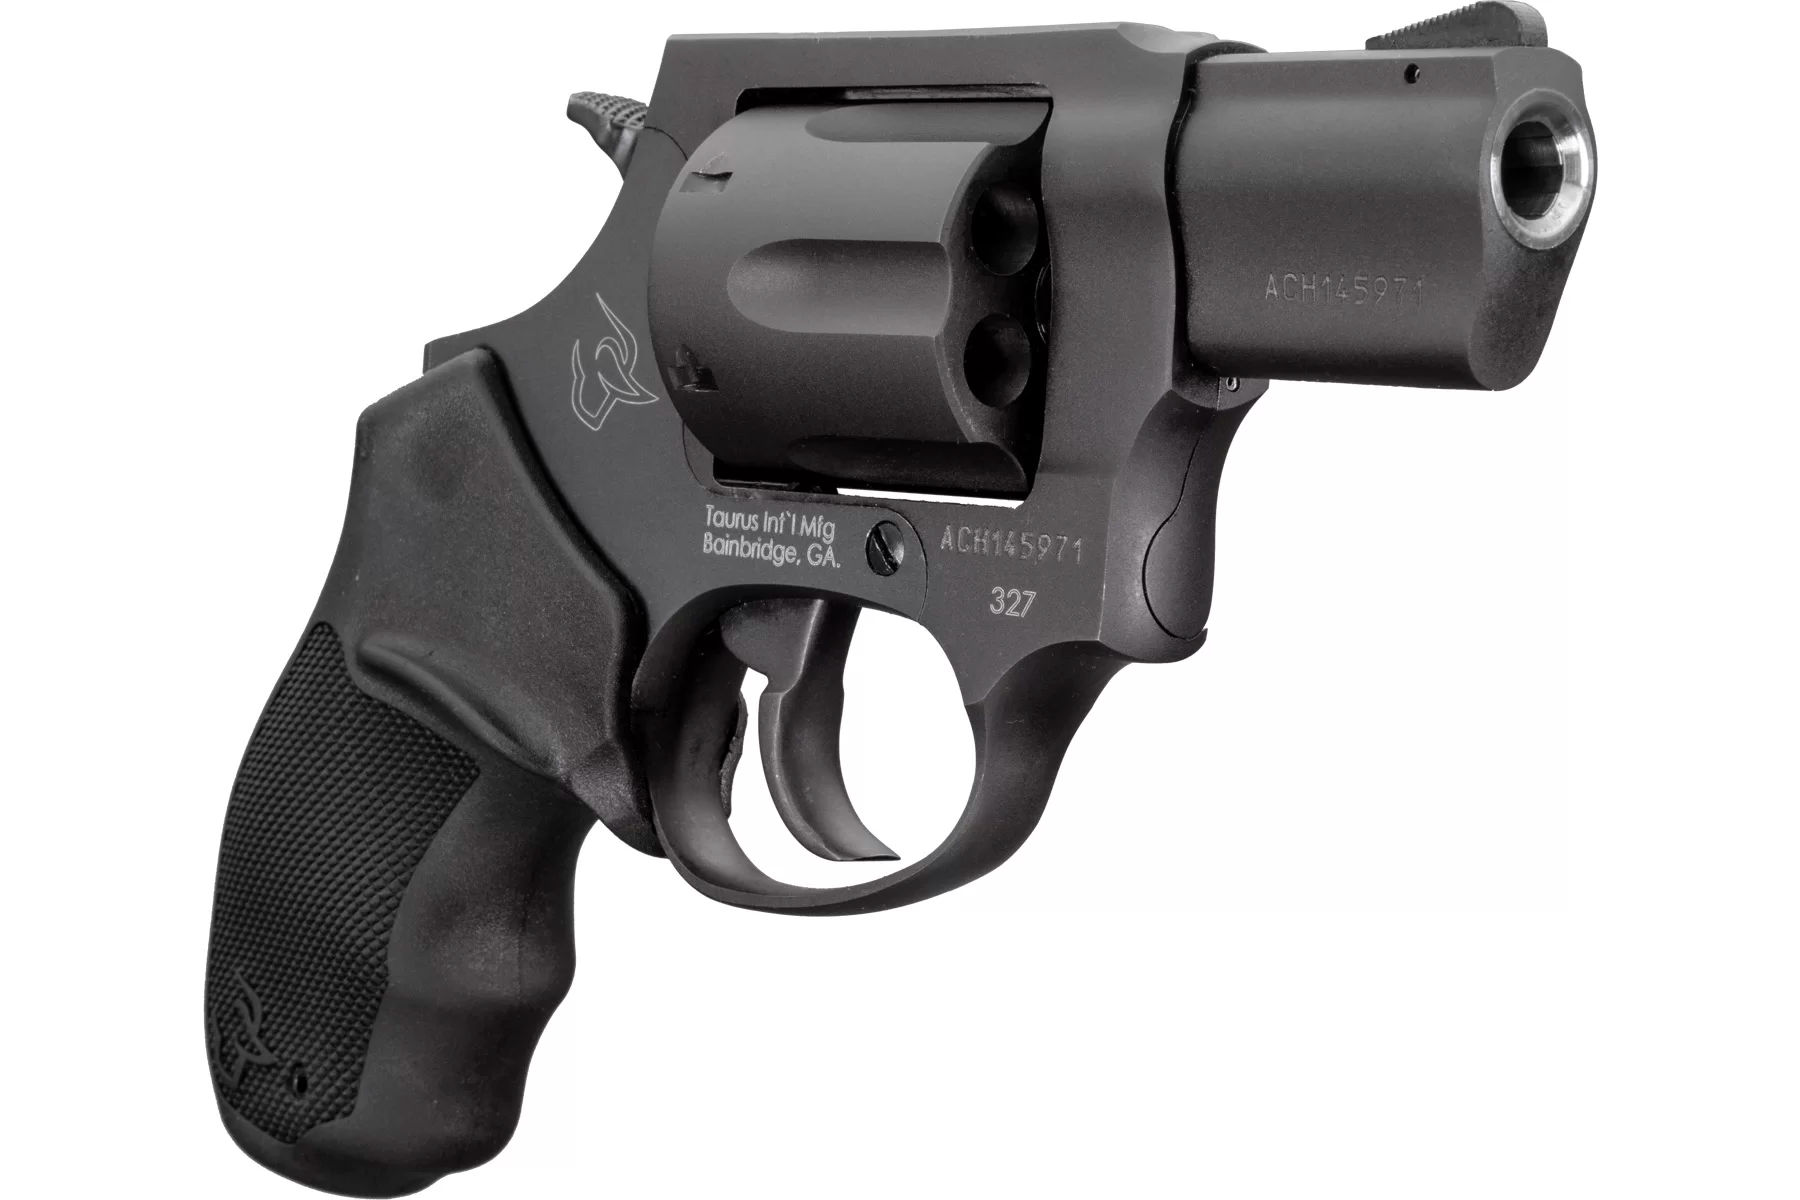 Taurus Announces The New Model 327 Revolver Chambered In .327 Federal Magnum